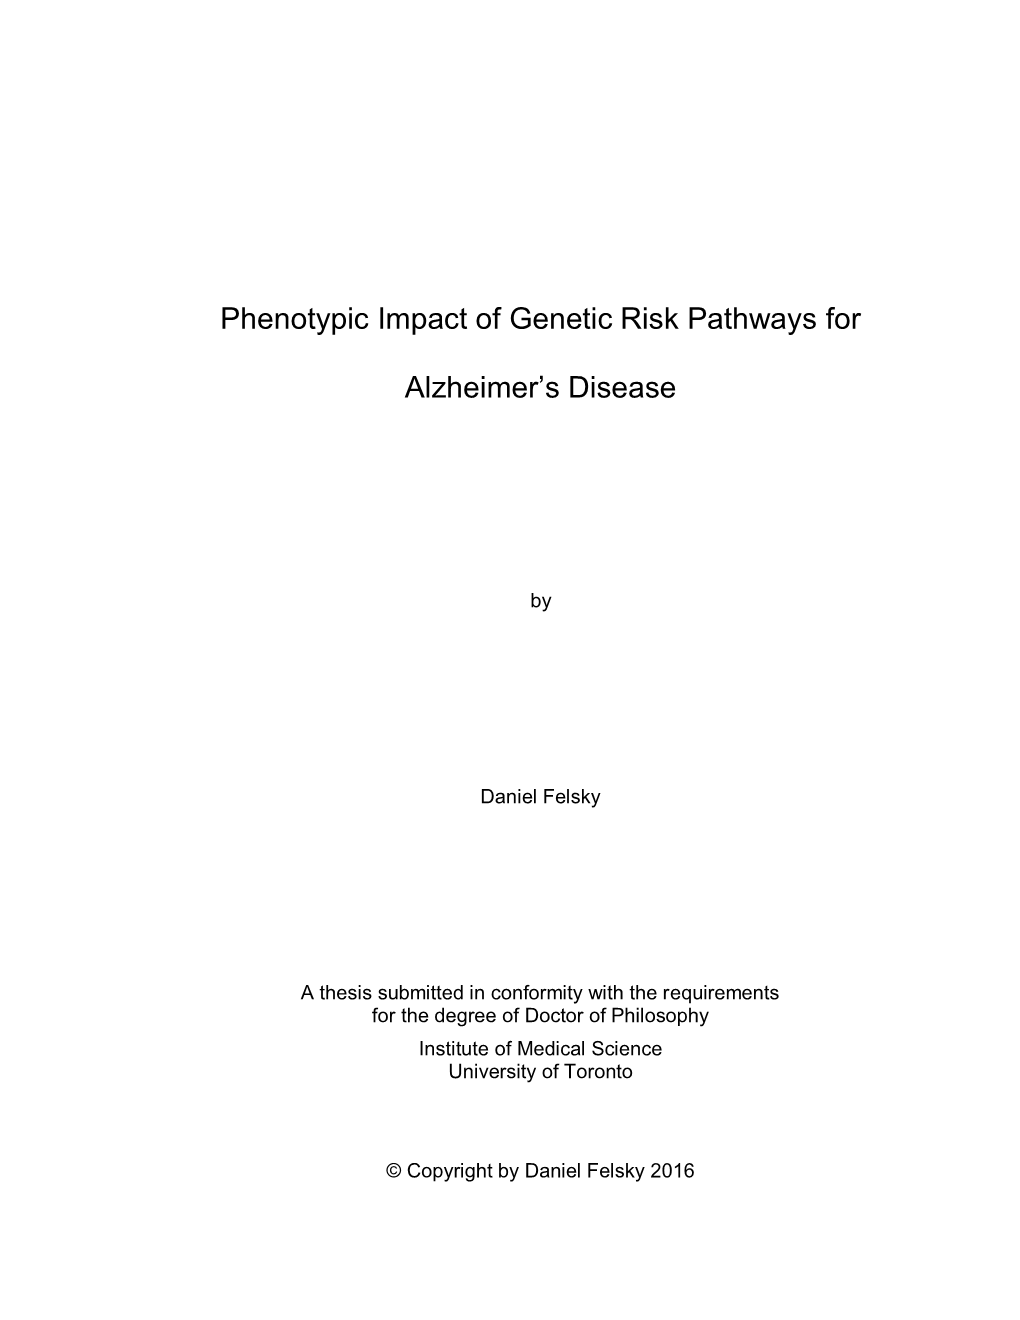 Phenotypic Impact of Genetic Risk Pathways for Alzheimer's Disease